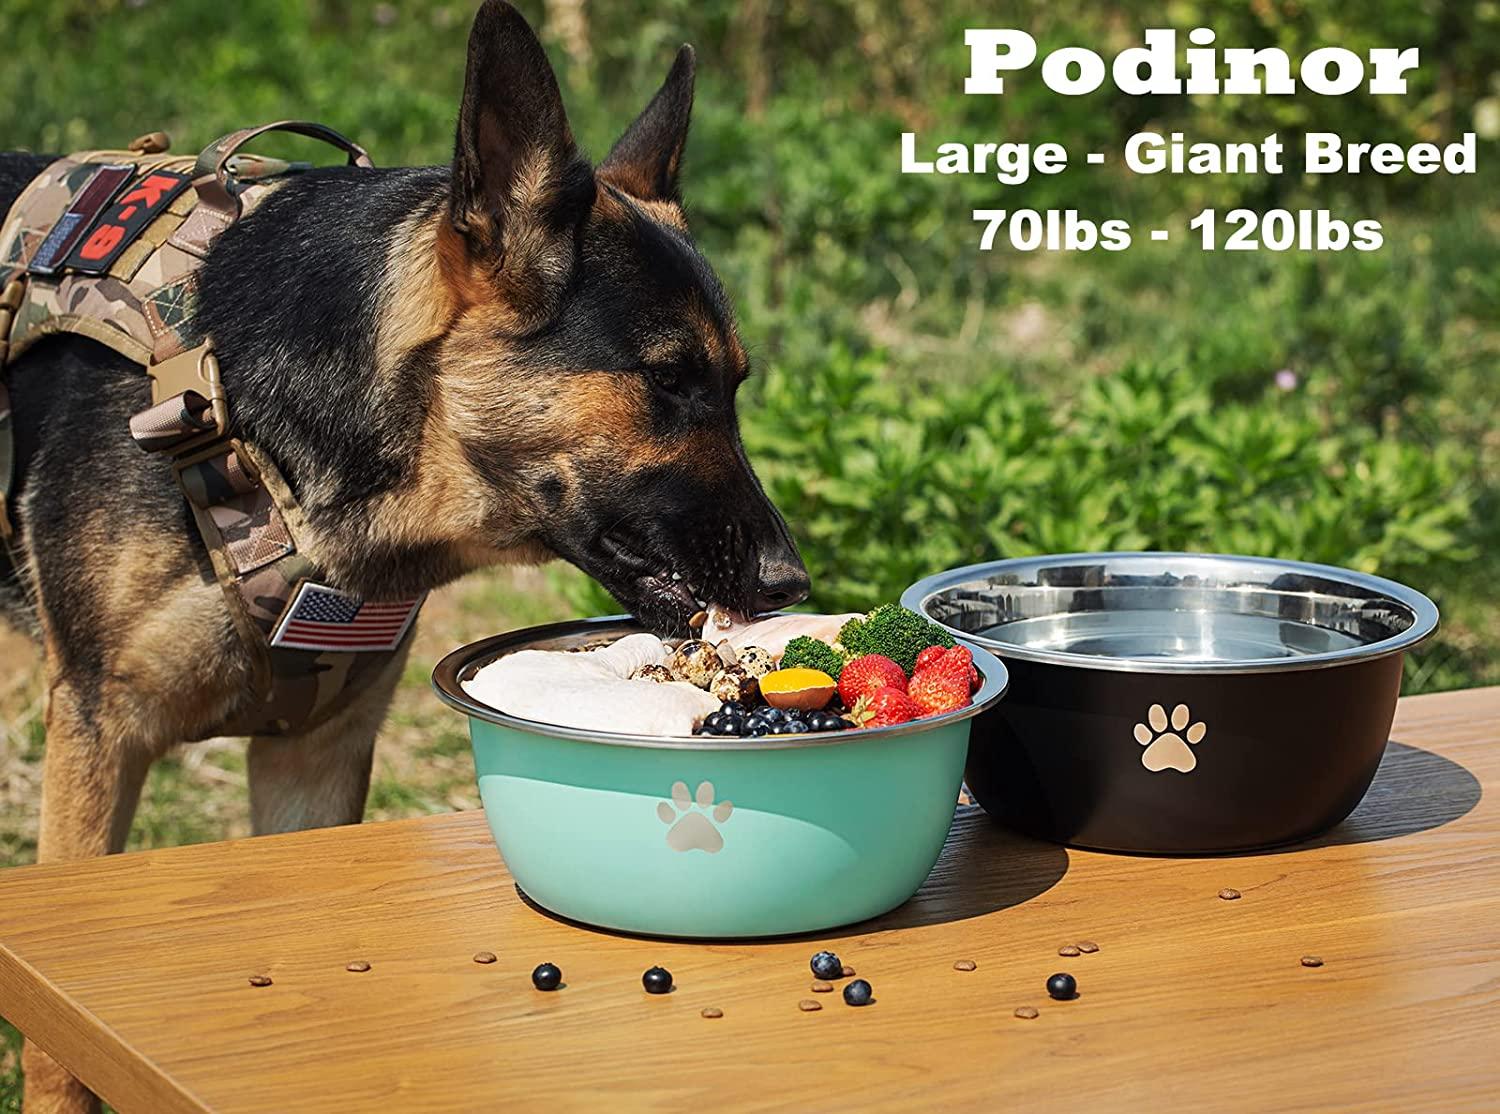 PEDAY peday large dog water bowl 304 stainless steel extra large dog bowl  for big & large dogs